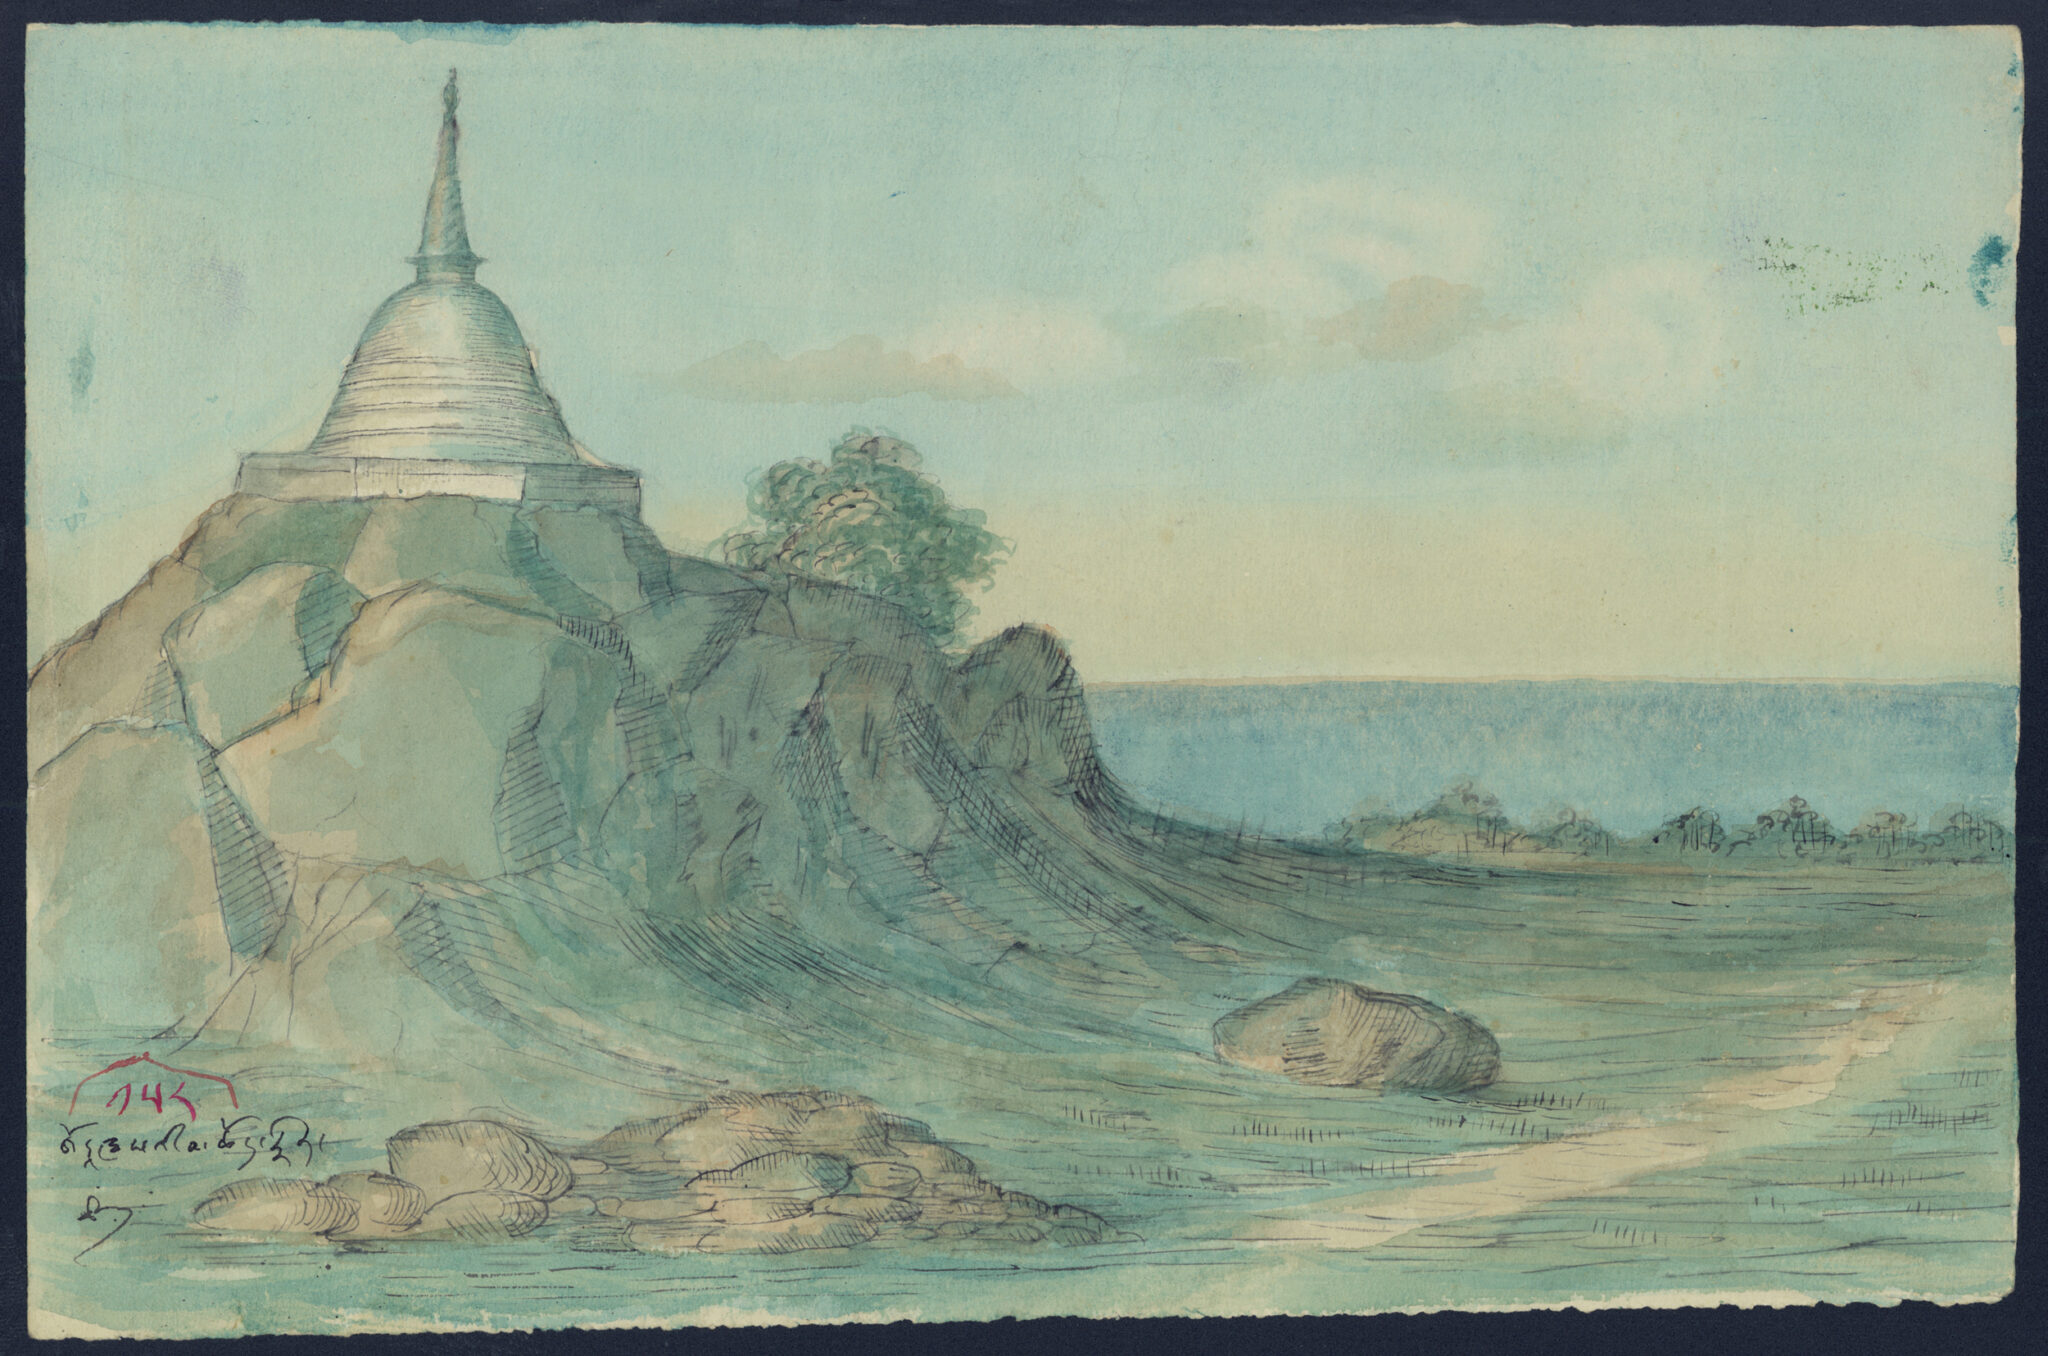 Watercolor depicting white stupa with needle-like spire situated on rocky outcropping